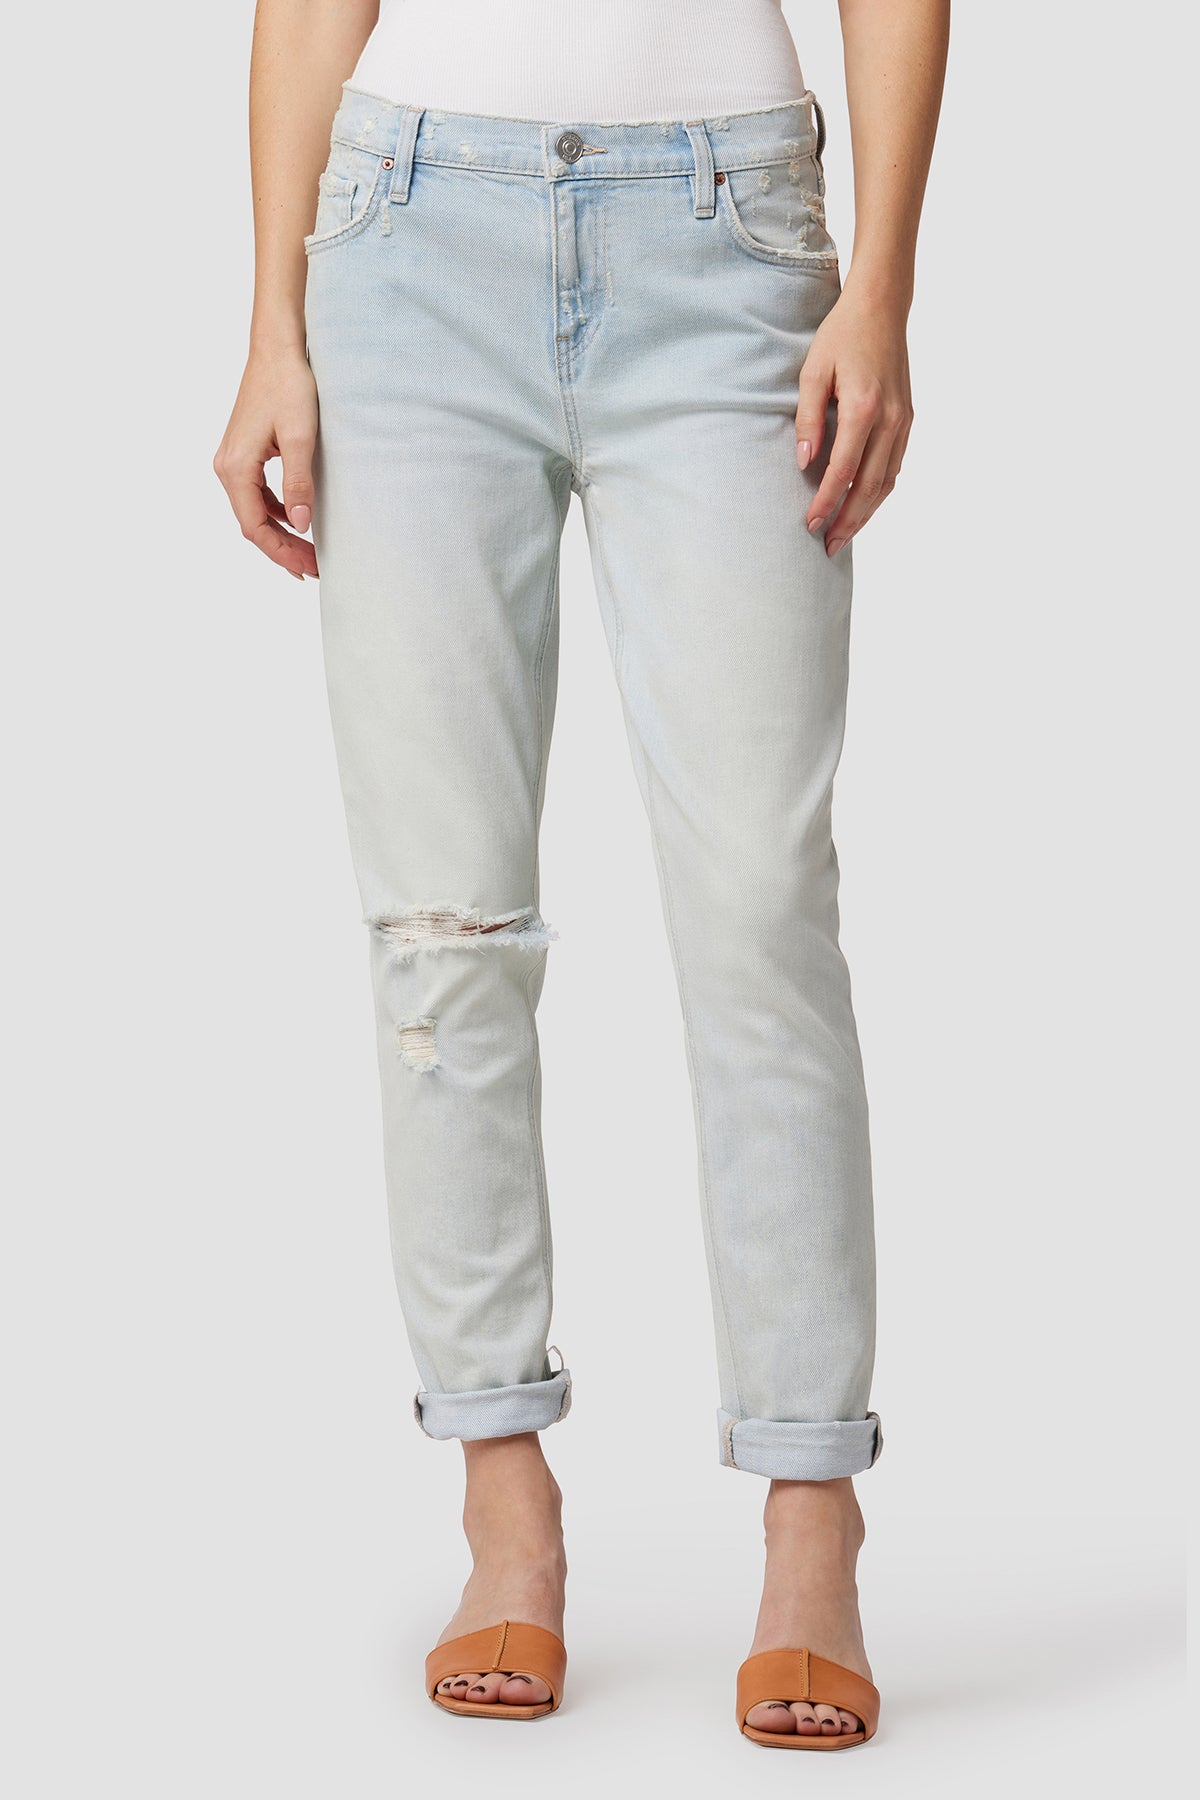 Buy Ether Men White Carrot Cropped Fit Mid Rise Clean Look Jeans - Jeans  for Men 2234305 | Myntra